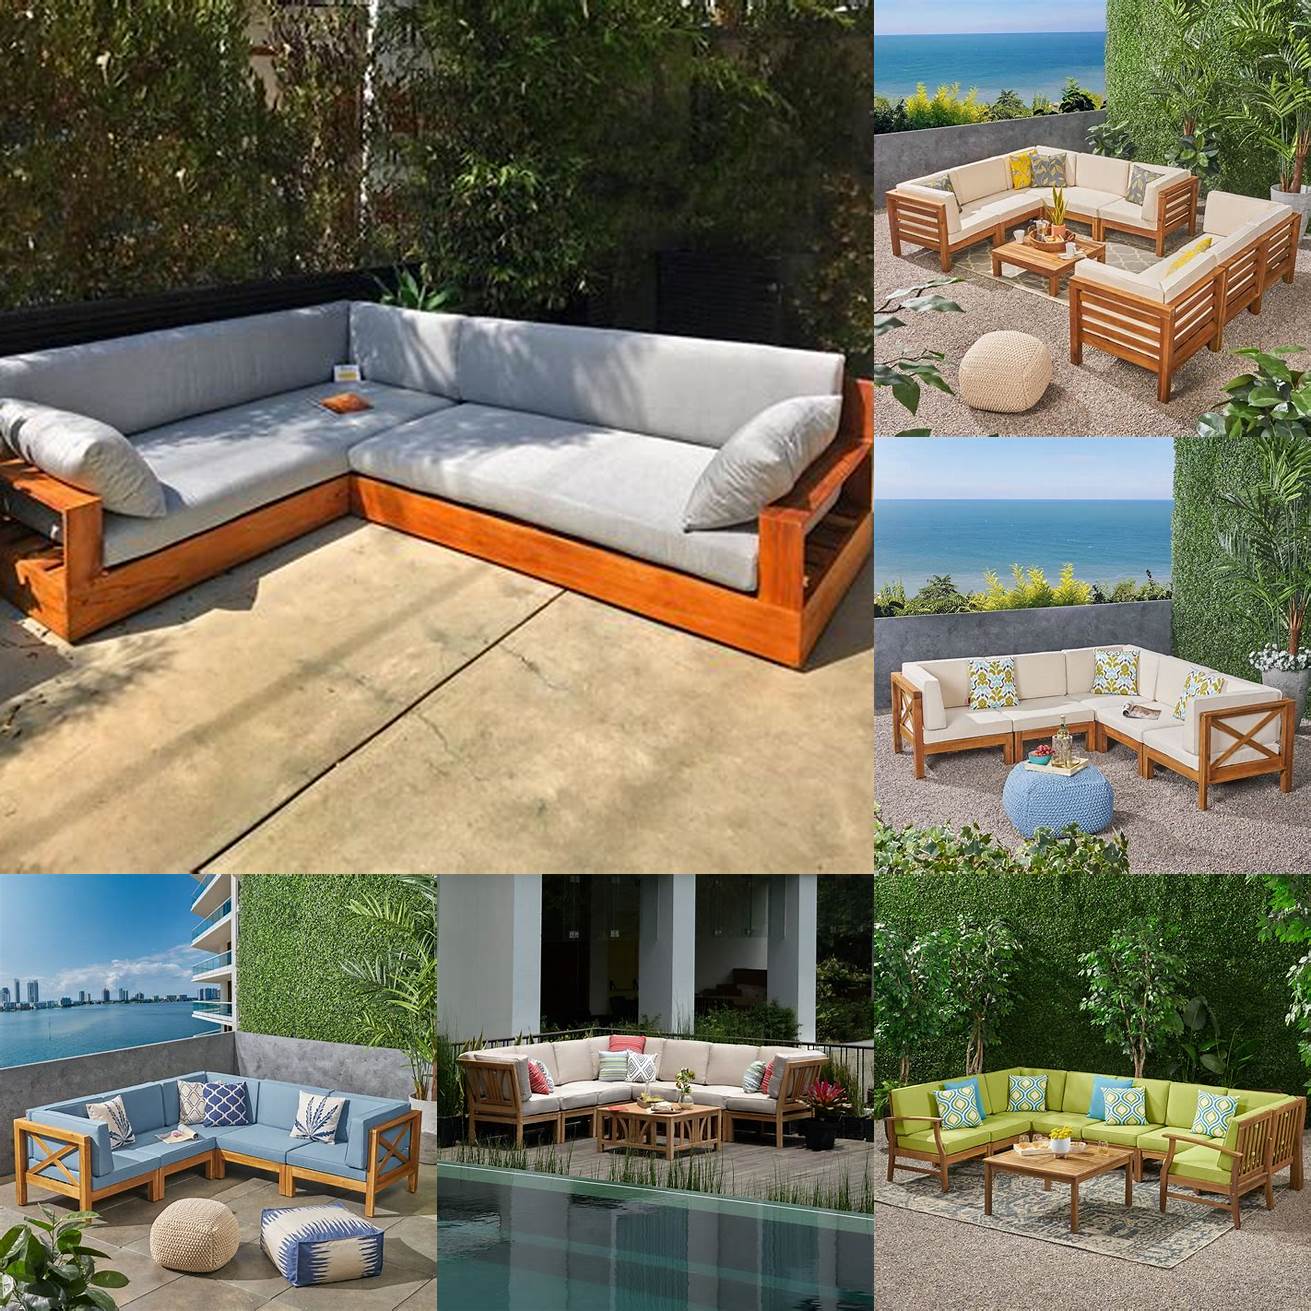 1 Teak outdoor furniture sectional deep cushions on a patio